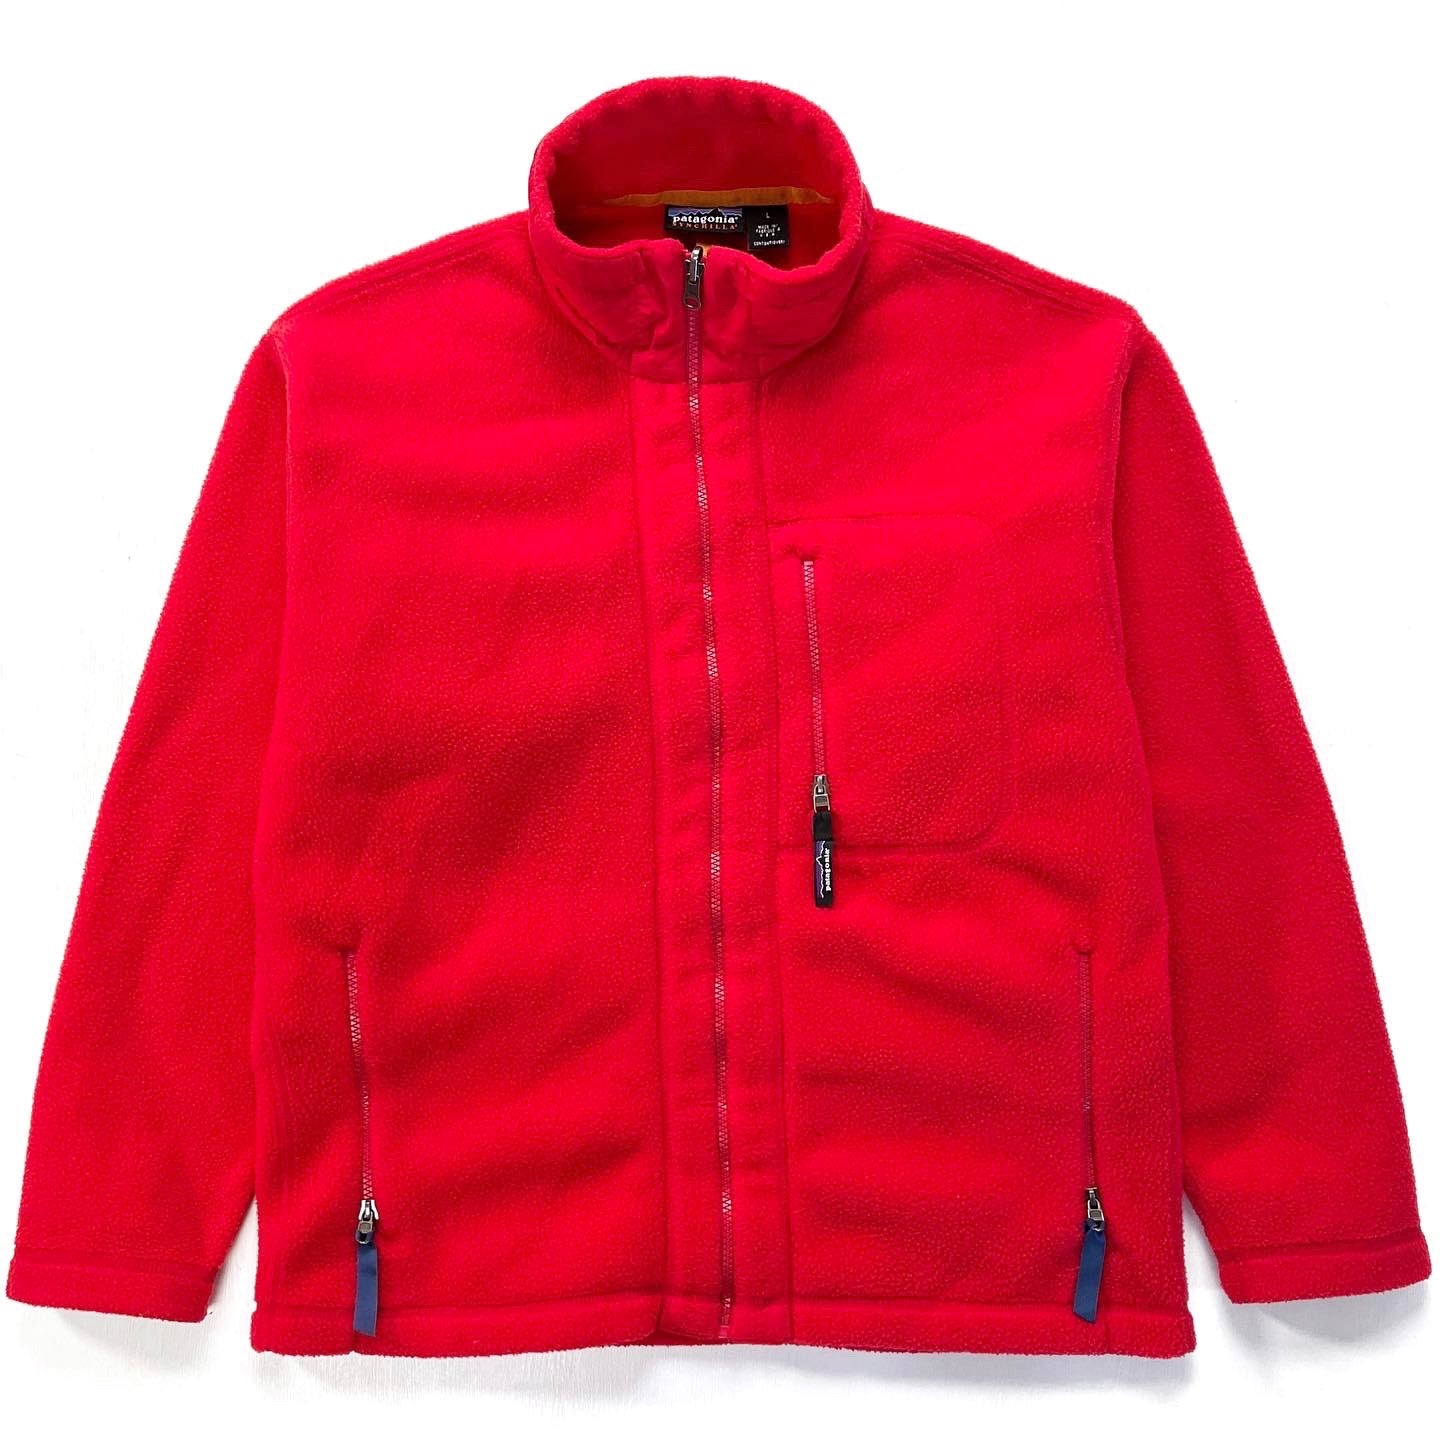 2000 Patagonia Made In The U.S.A. Synchilla Jacket, French Red (L)